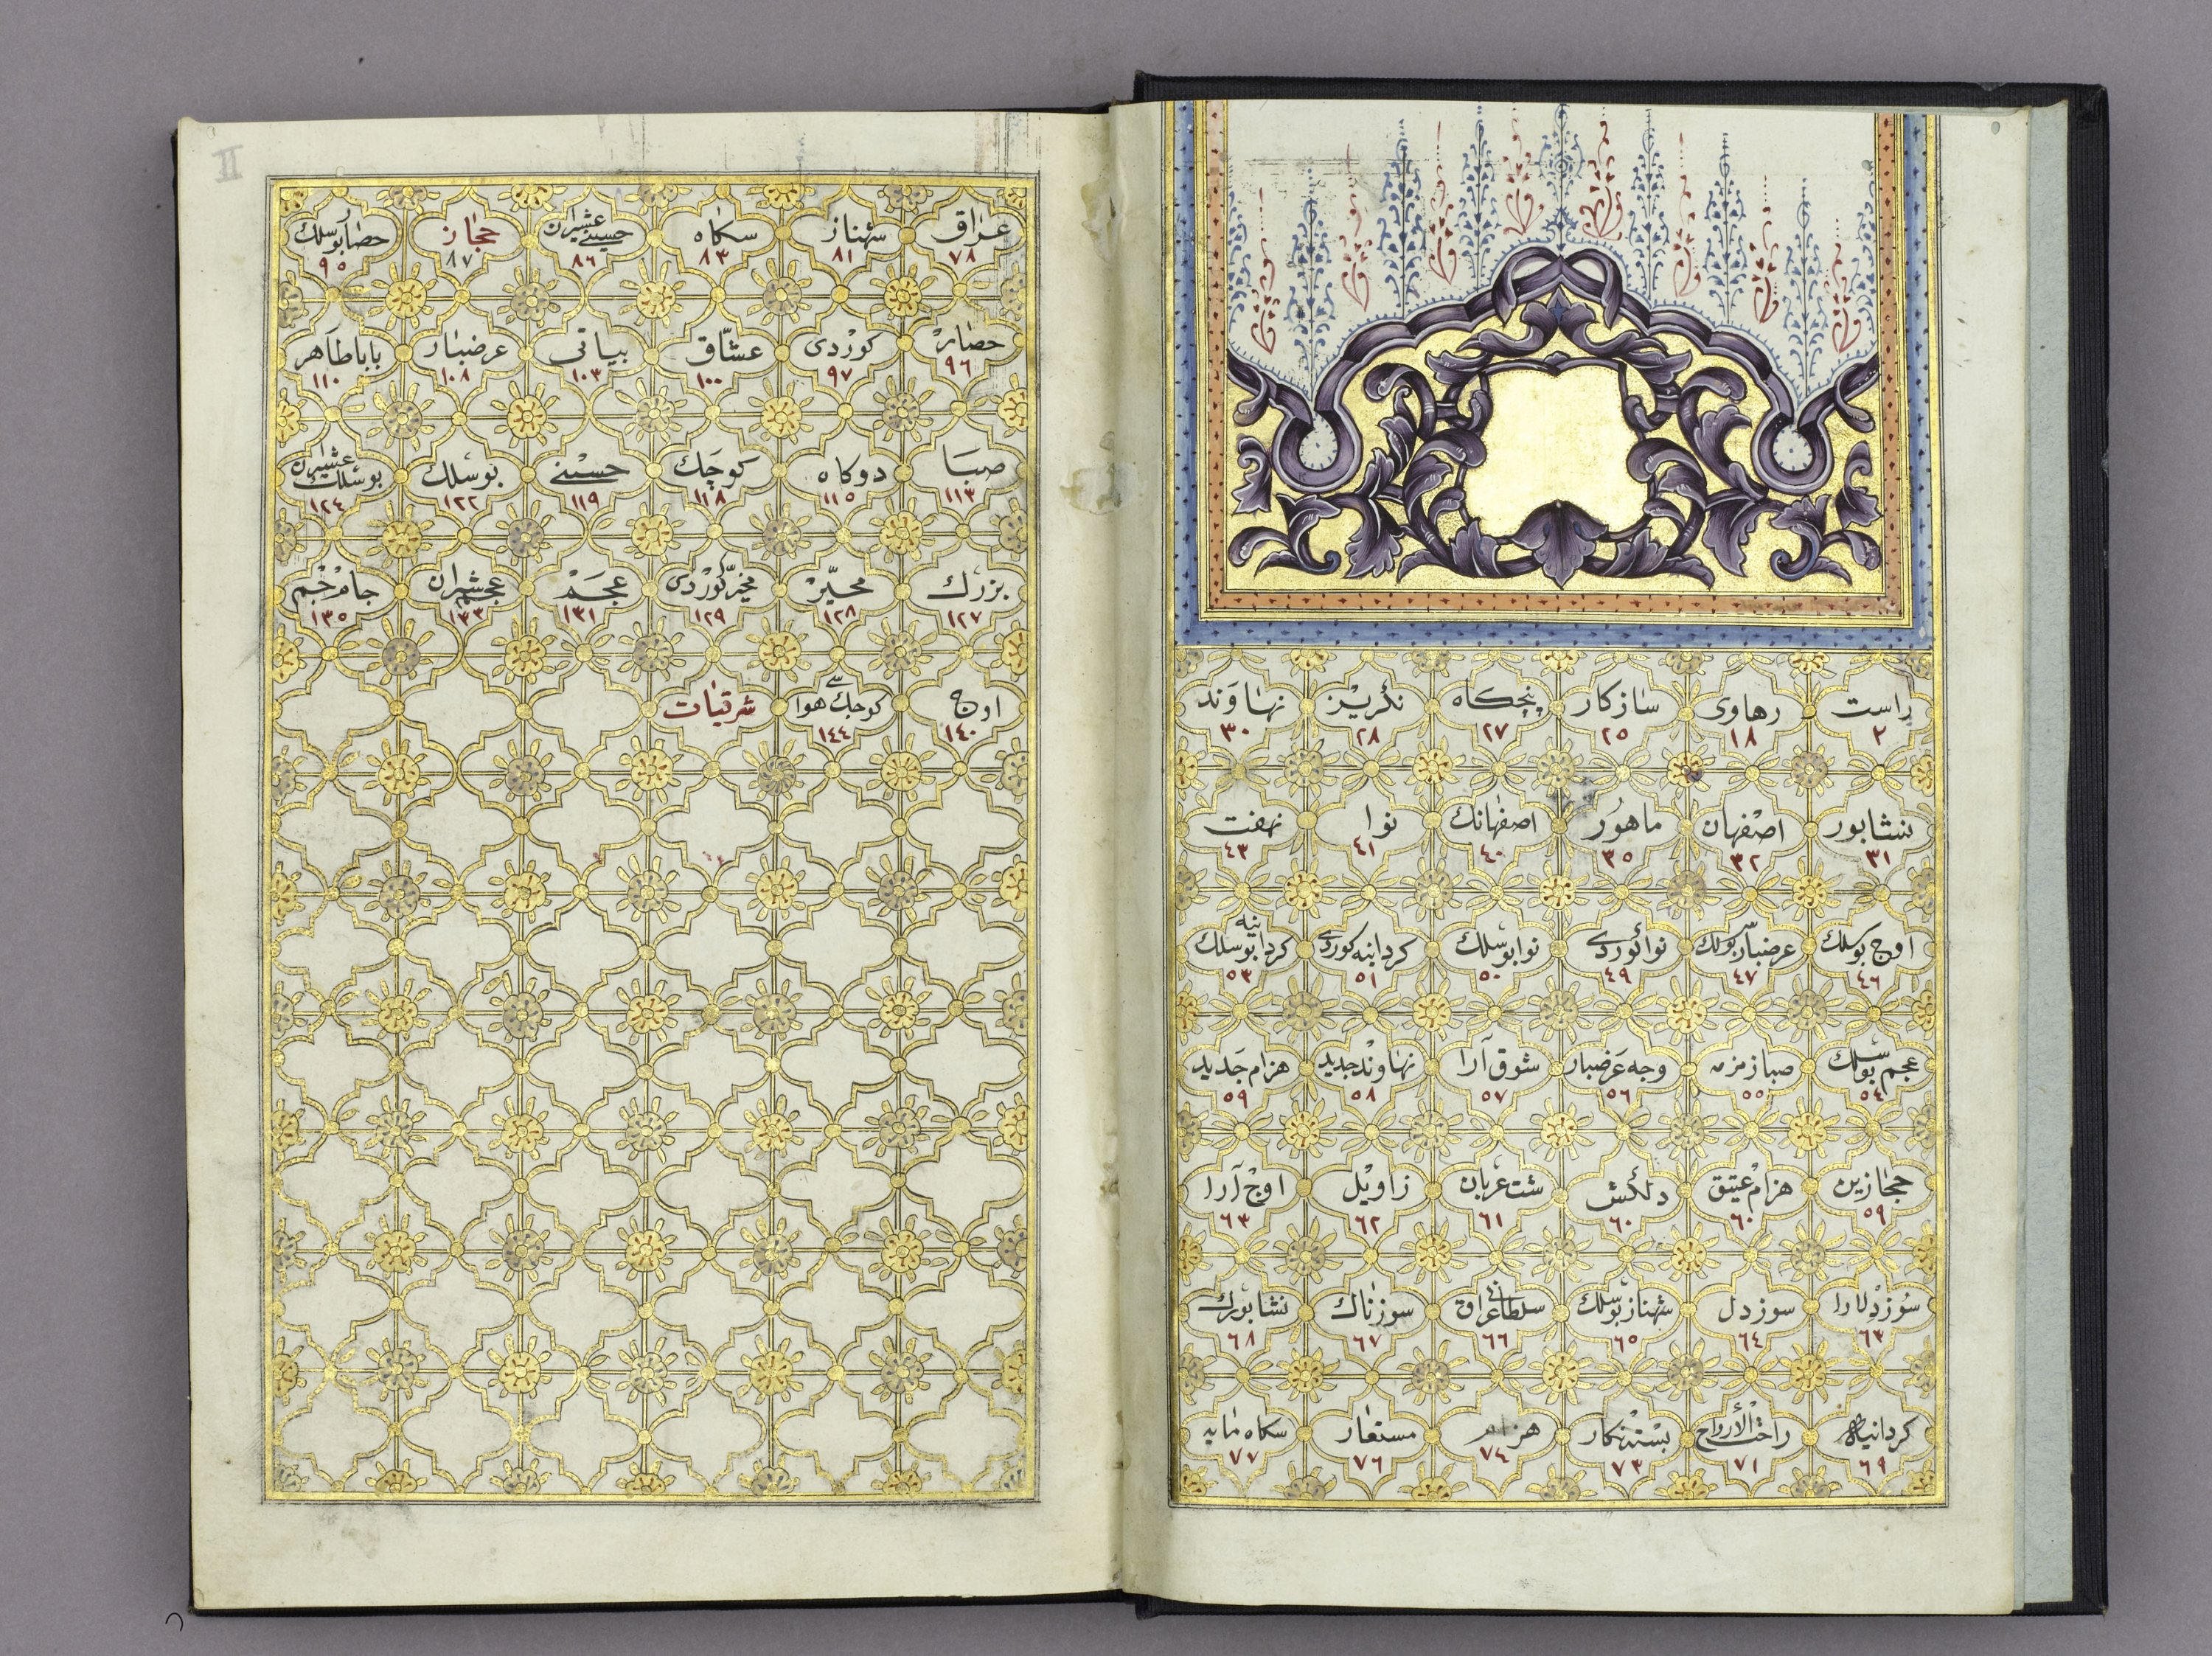 A song journal copied by Dürbinizade Hafız Mustafa, the chief clerk of the Haremeyn (Mecca and Medina) Foundation. (Courtesy of Istanbul Research Institute)